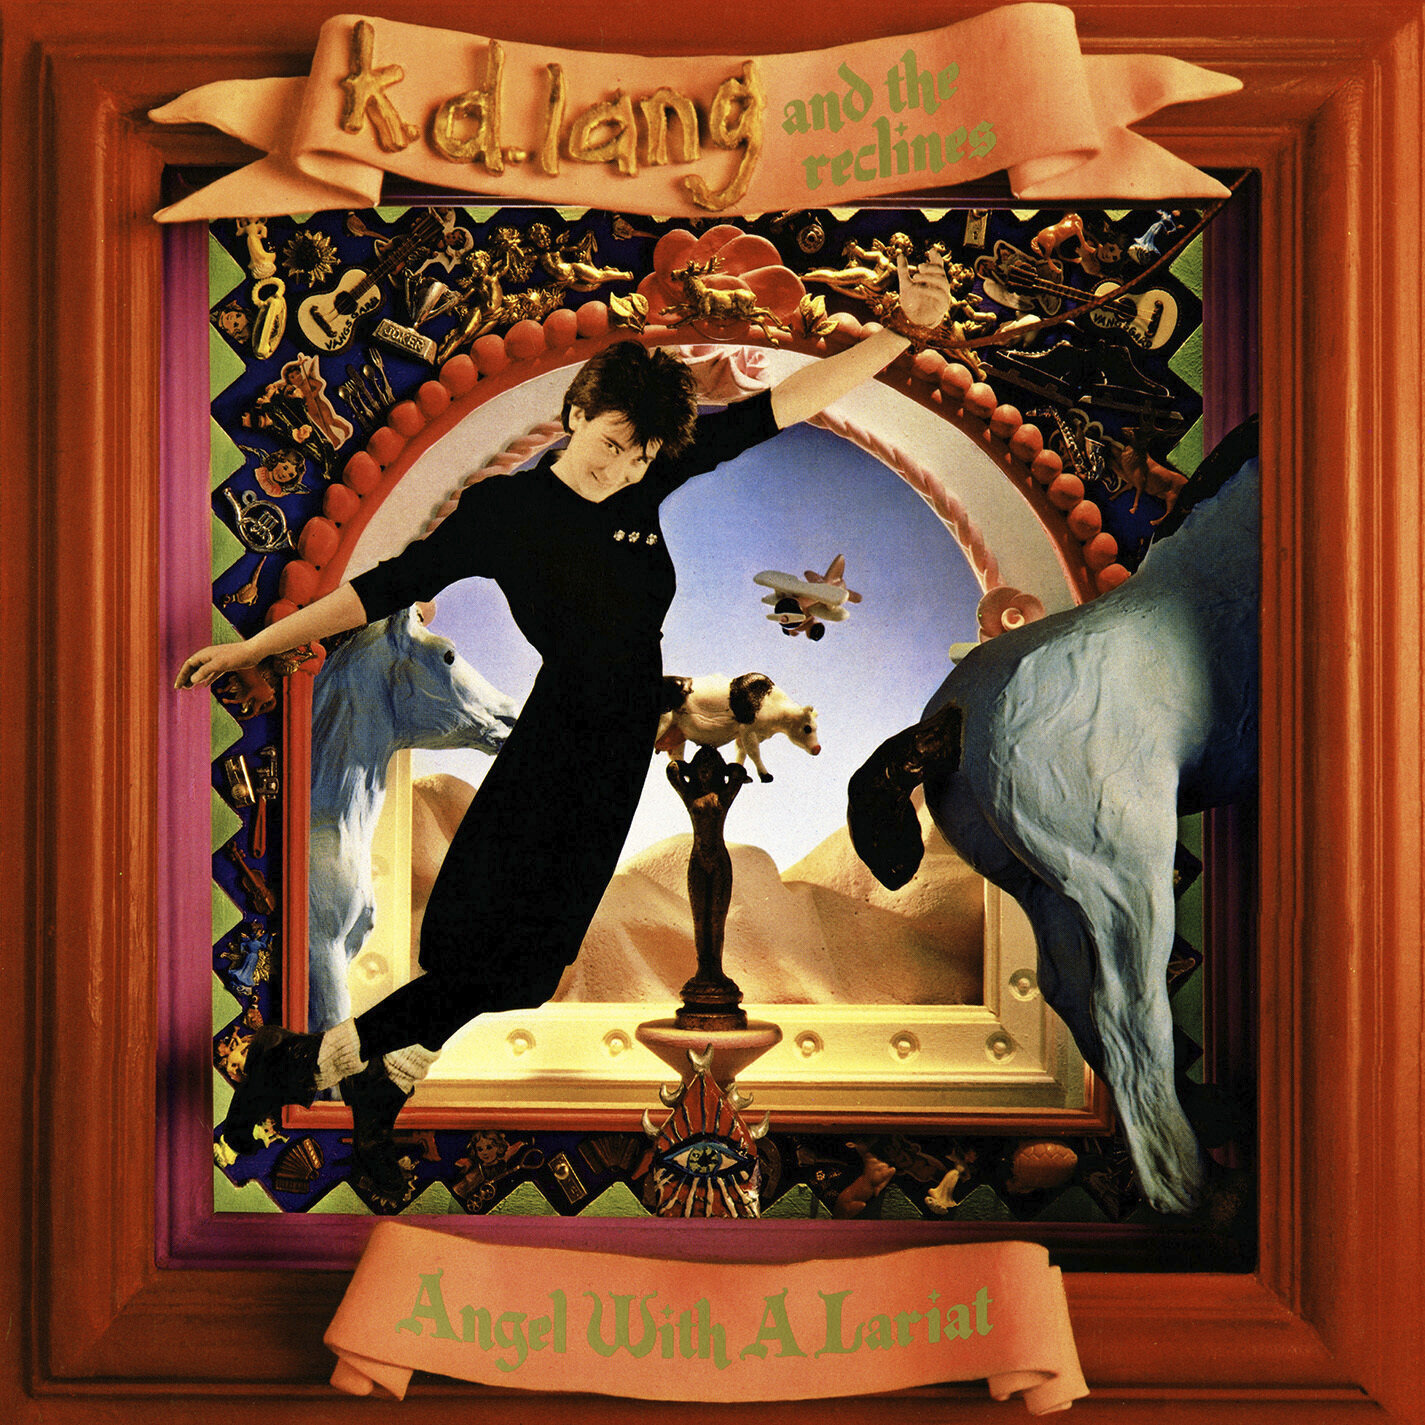 K.D. Lang And The Reclines - Angel With A Lariat (RSD 2020) (Translucent Red Vinyl)